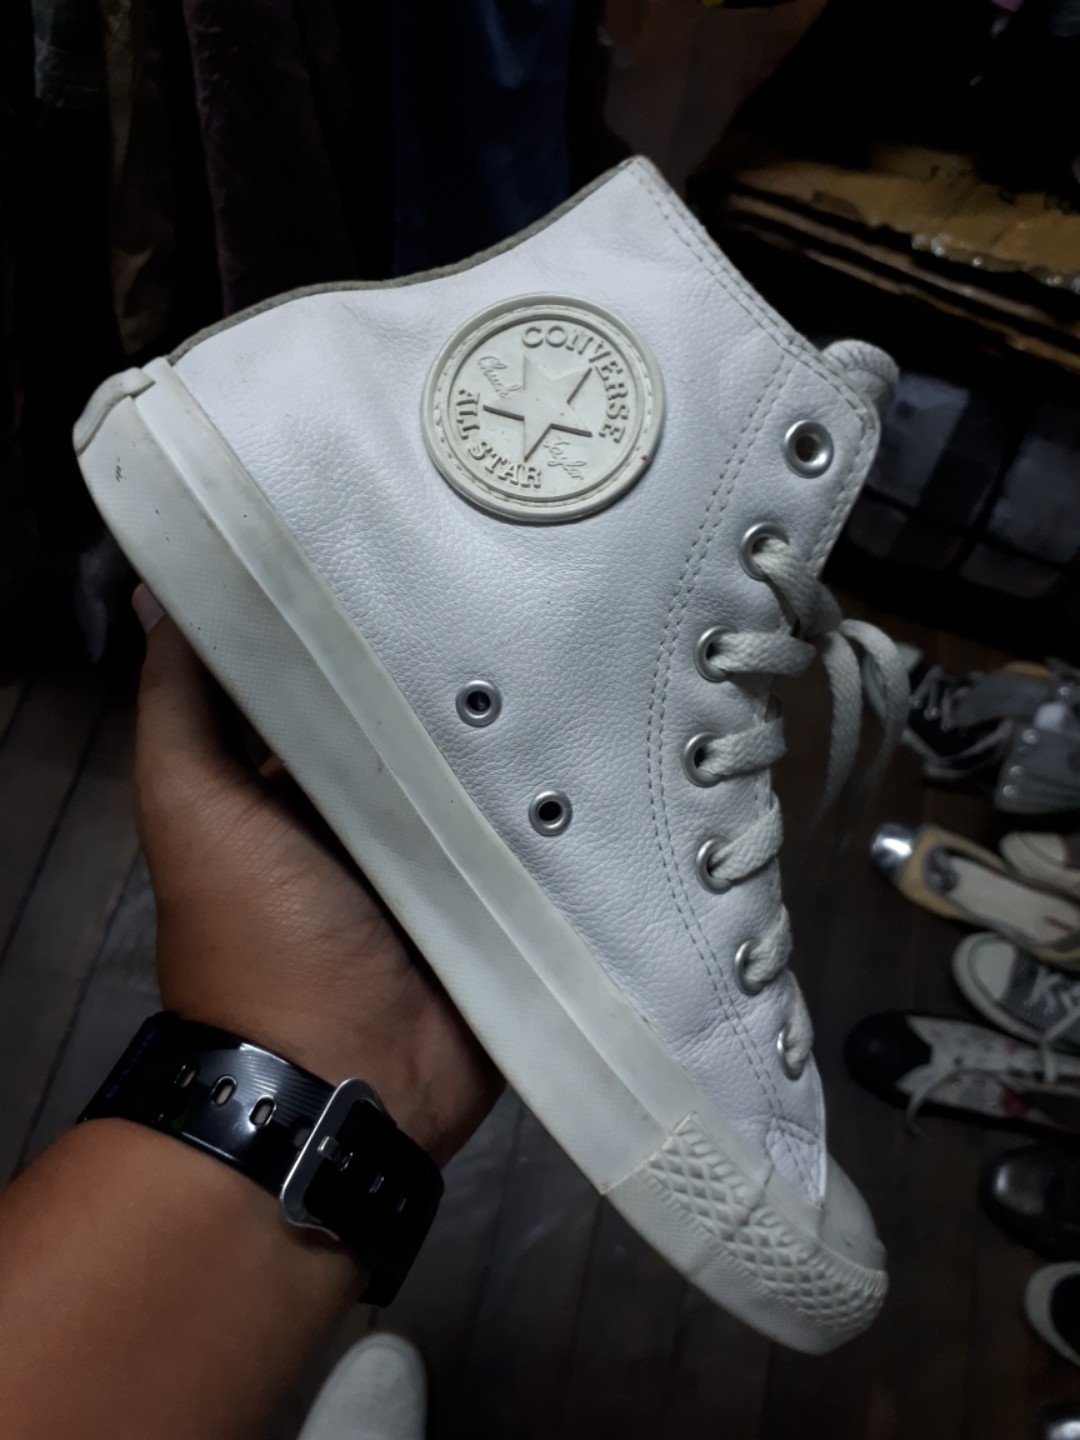 converse all star leather hi top